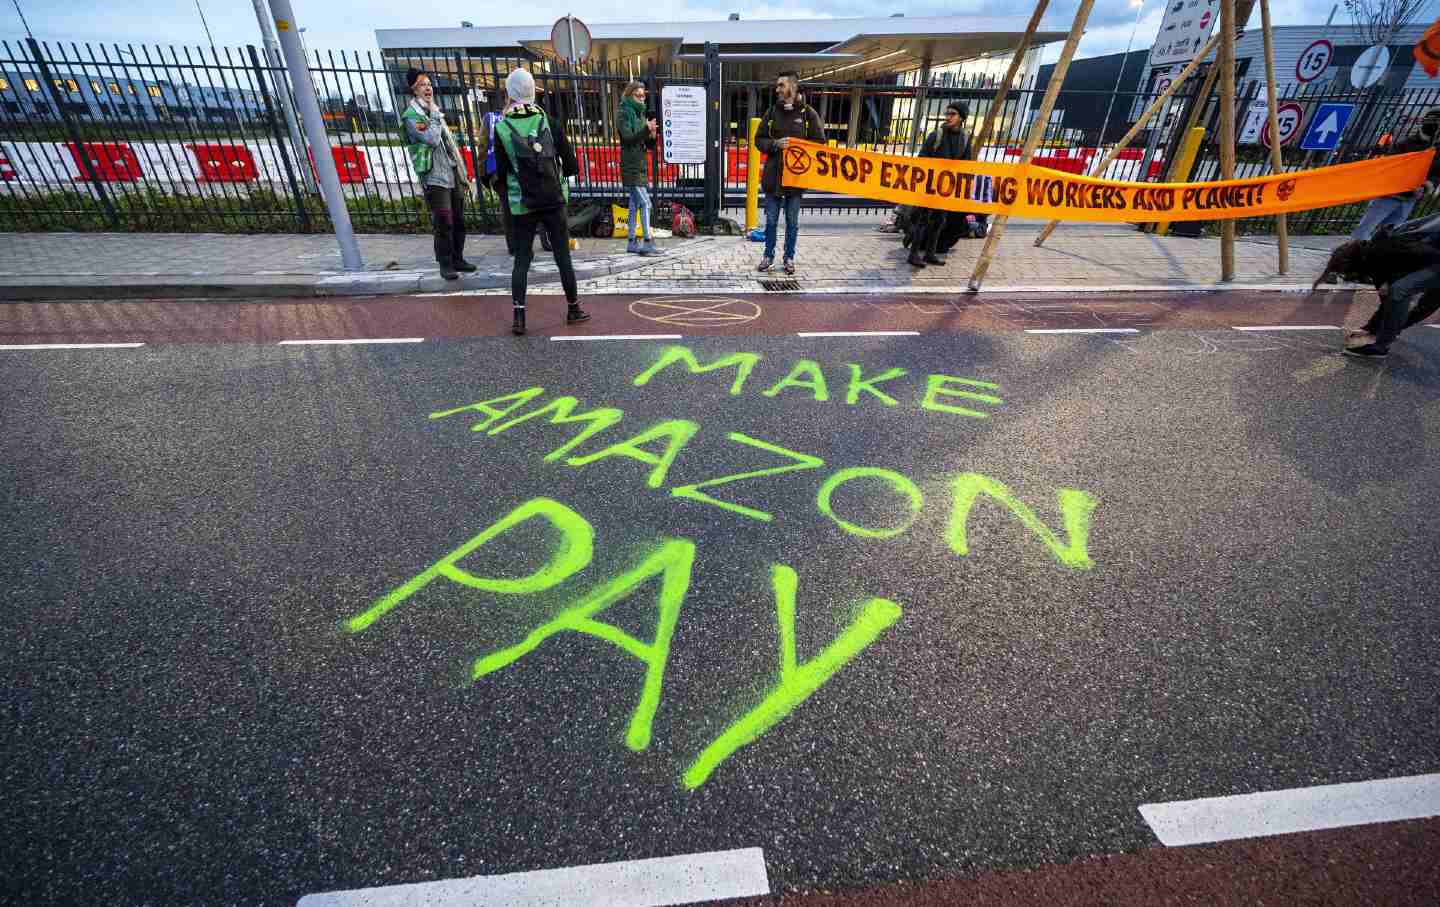 Extinction Rebellion climate activists block access to a Netherlands Amazon distribution center and spray paint 